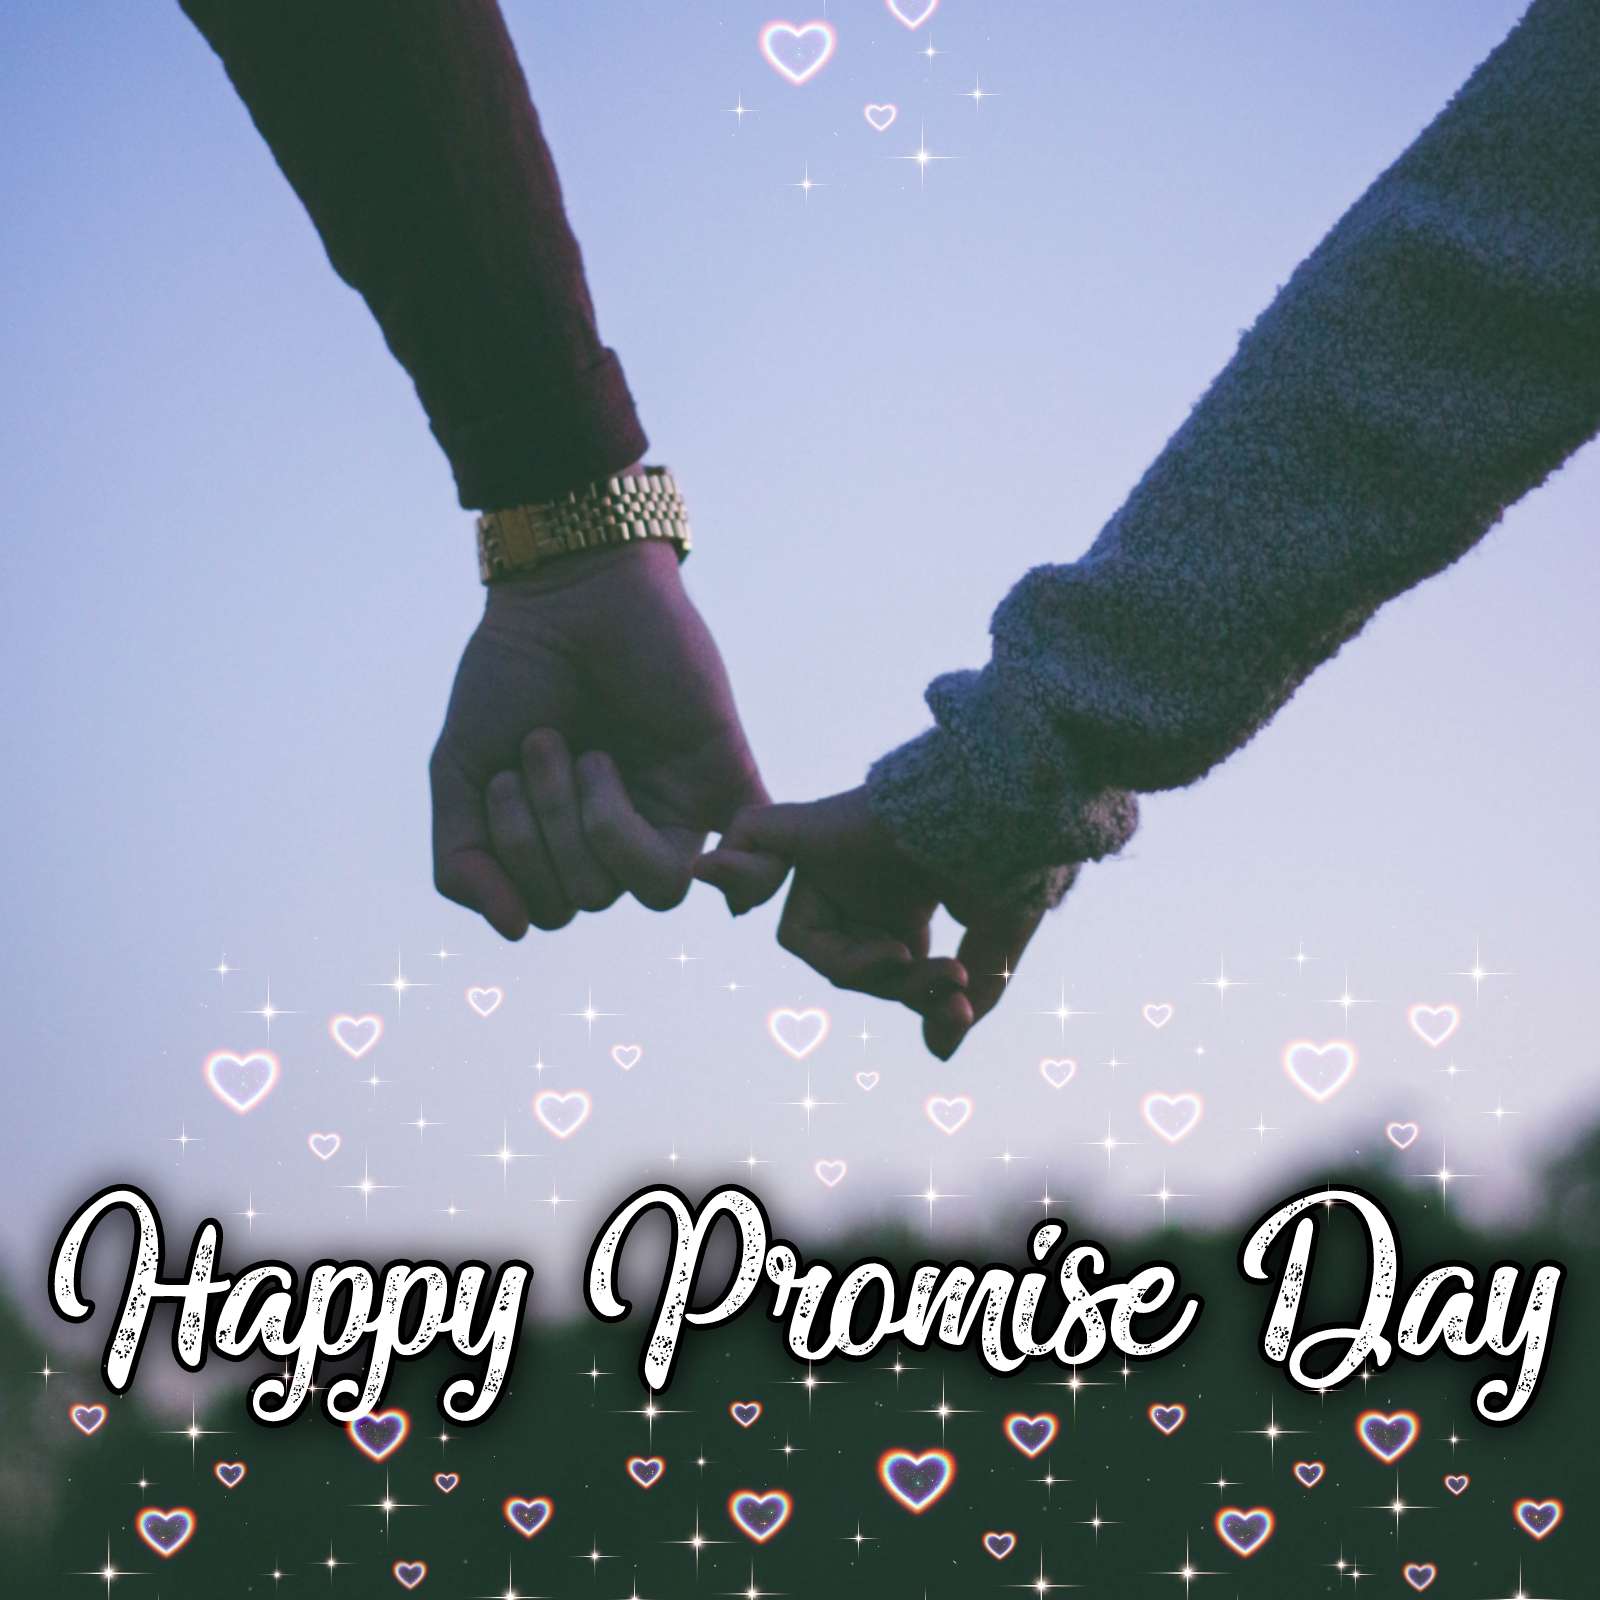 11 February 2022 Promise Day Images HD Download